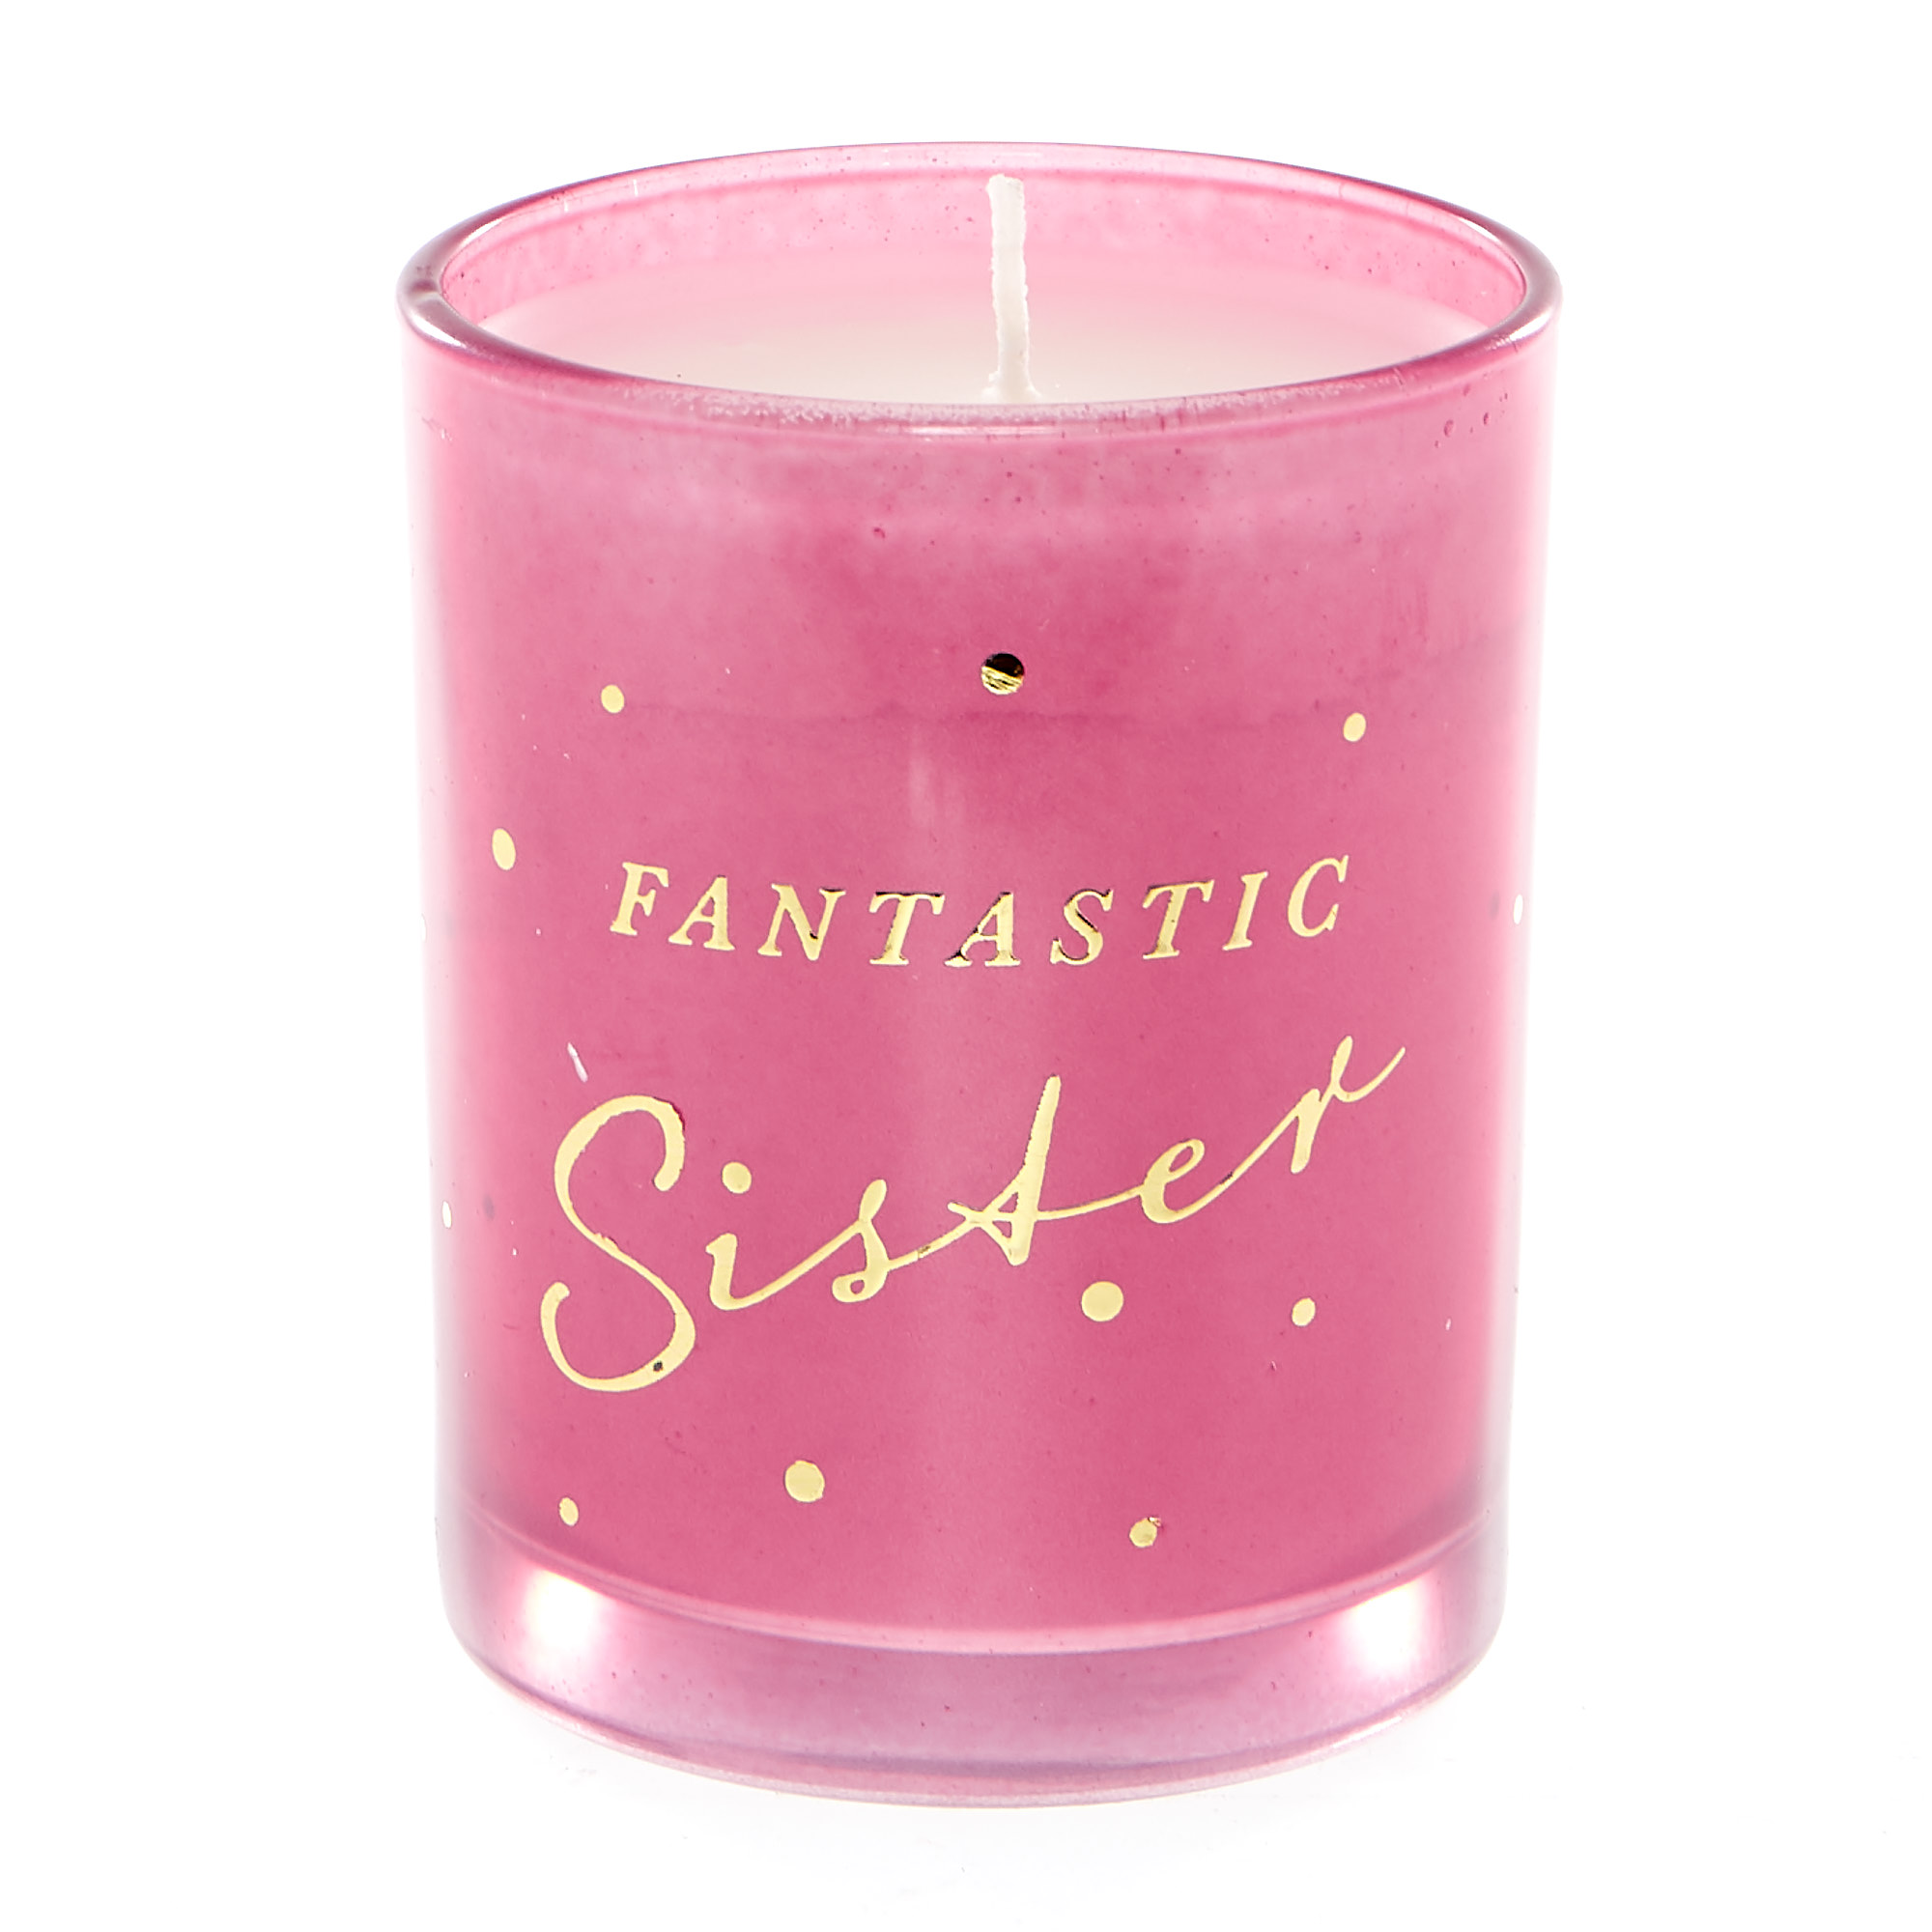 Fantastic Sister Vanilla Scented Candle